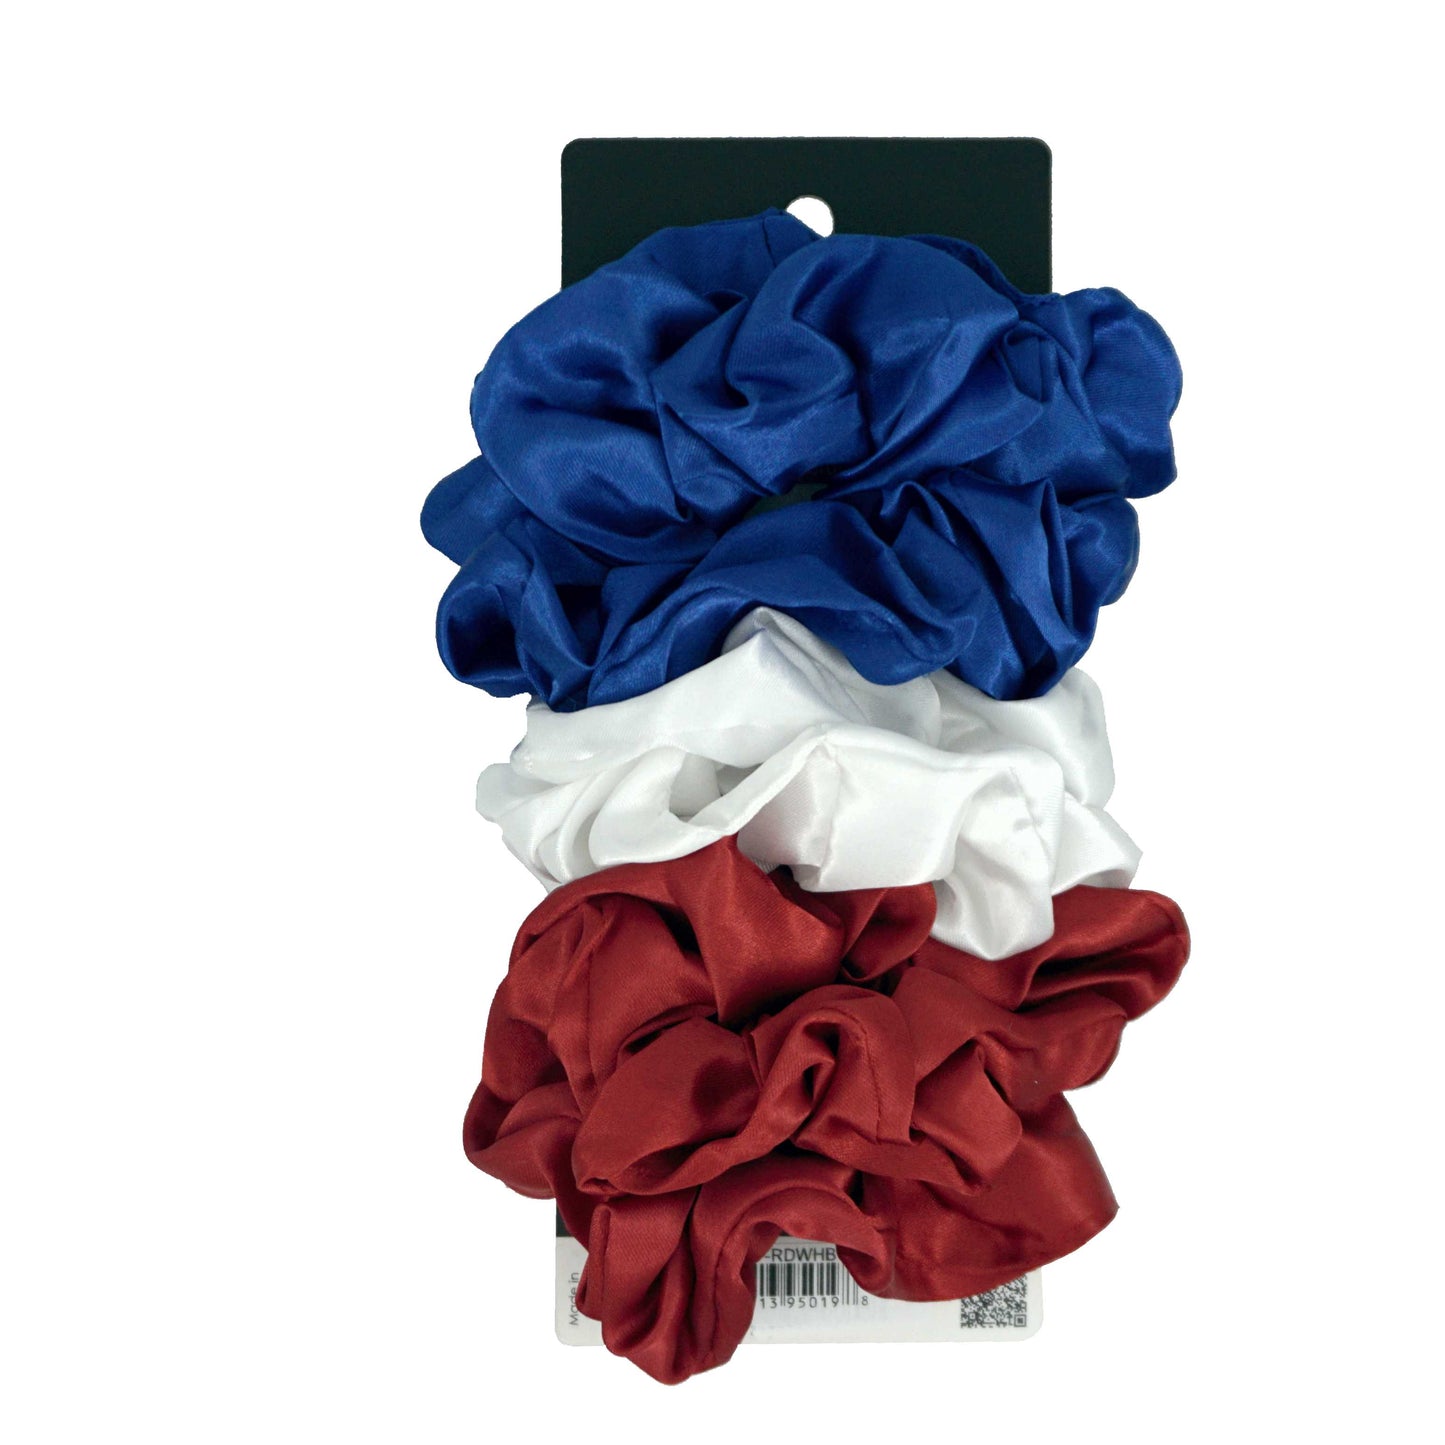 Amelia Beauty Products, Red, White and Blue Satin Scrunchies, 3.5in Diameter, Gentle on Hair, Strong Hold, No Snag, No Dents or Creases. 8 Pack